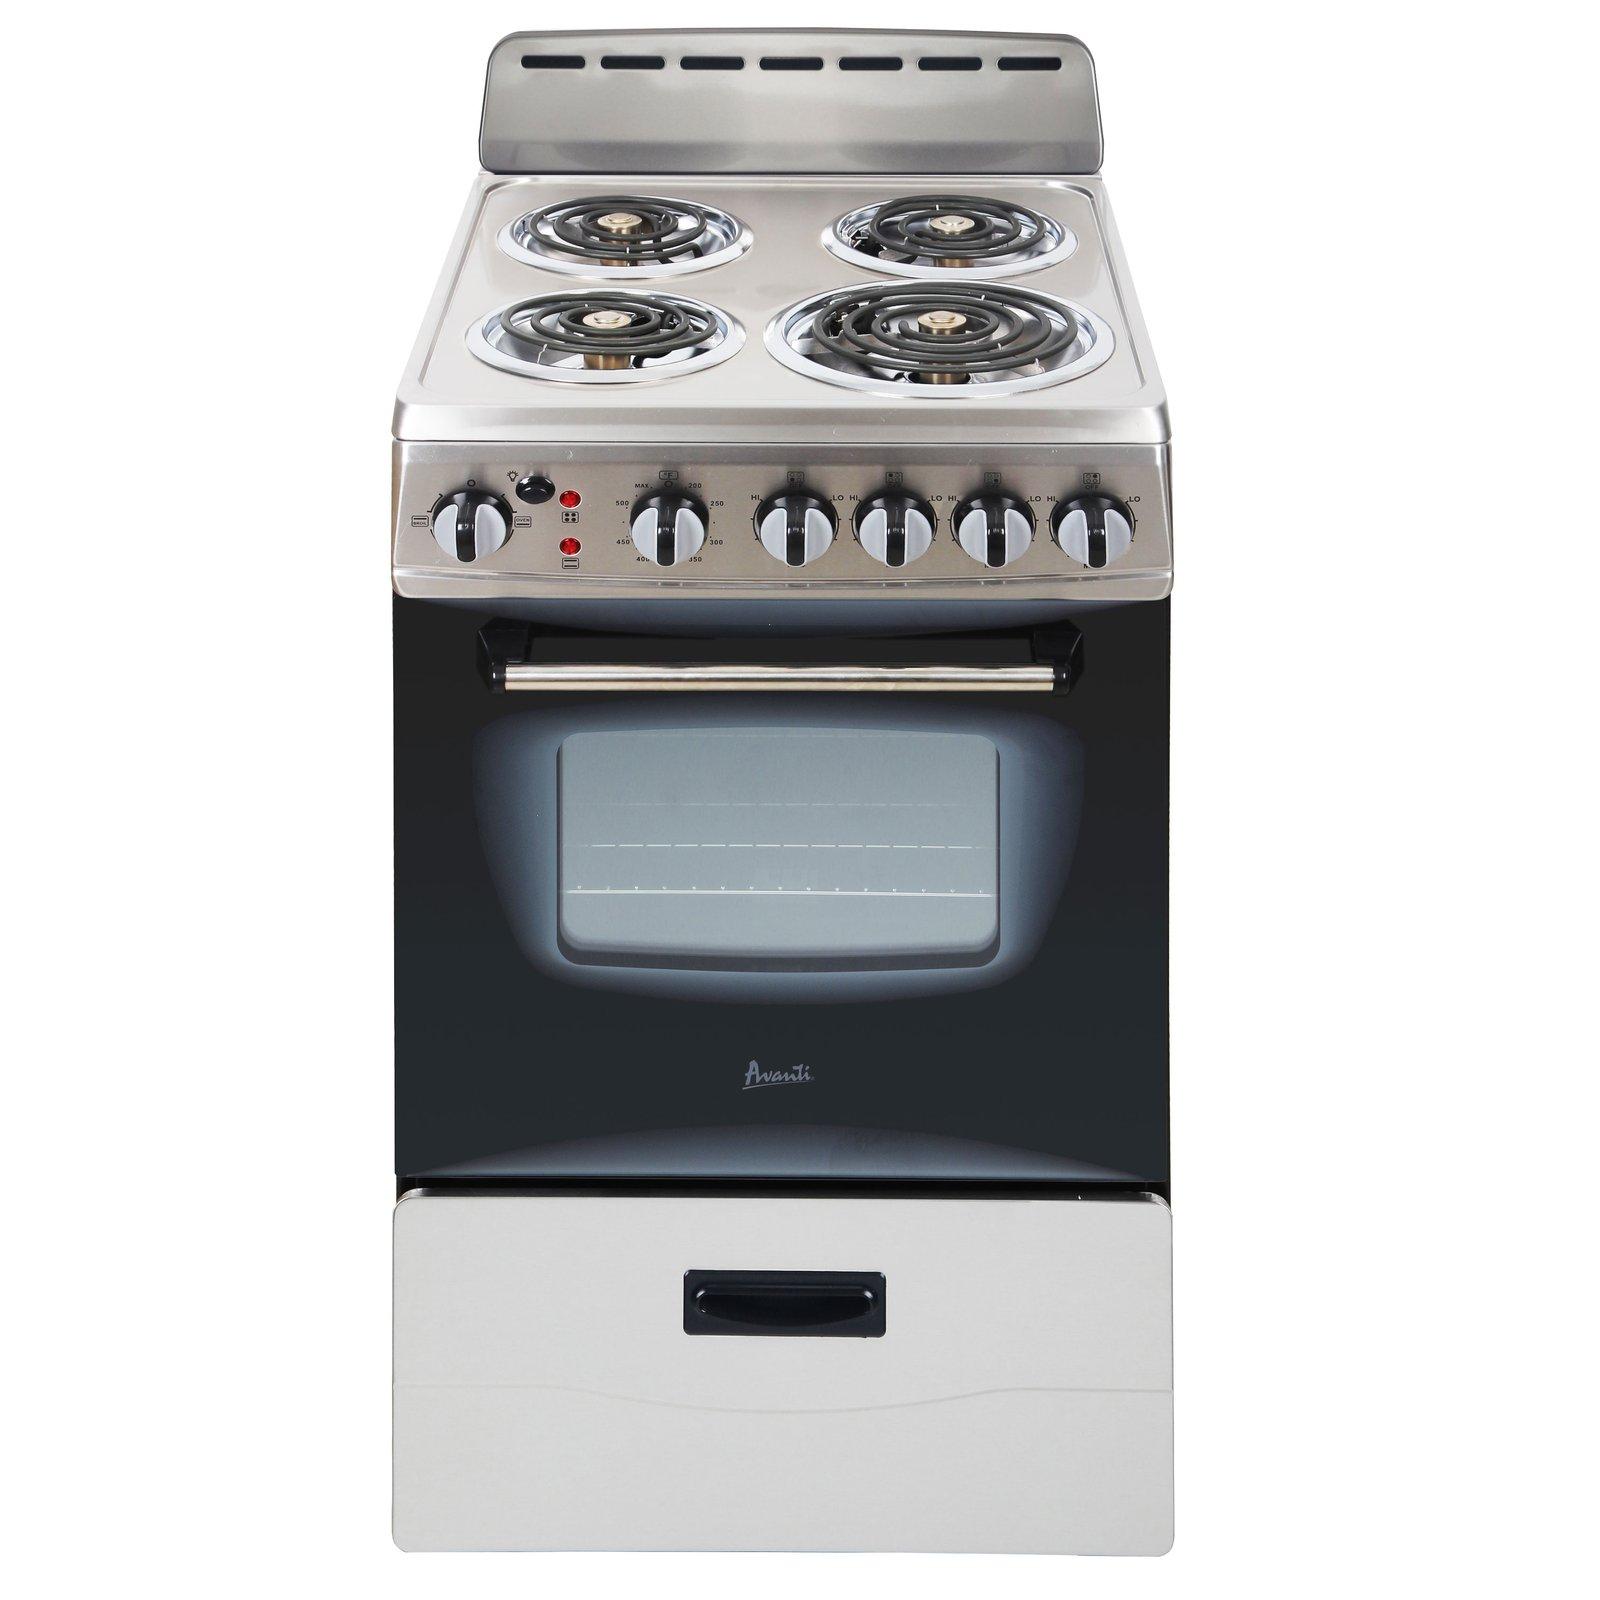 Avanti 20" Electric Range Oven with Framed Glass Door - White / 2.1 cu. ft.